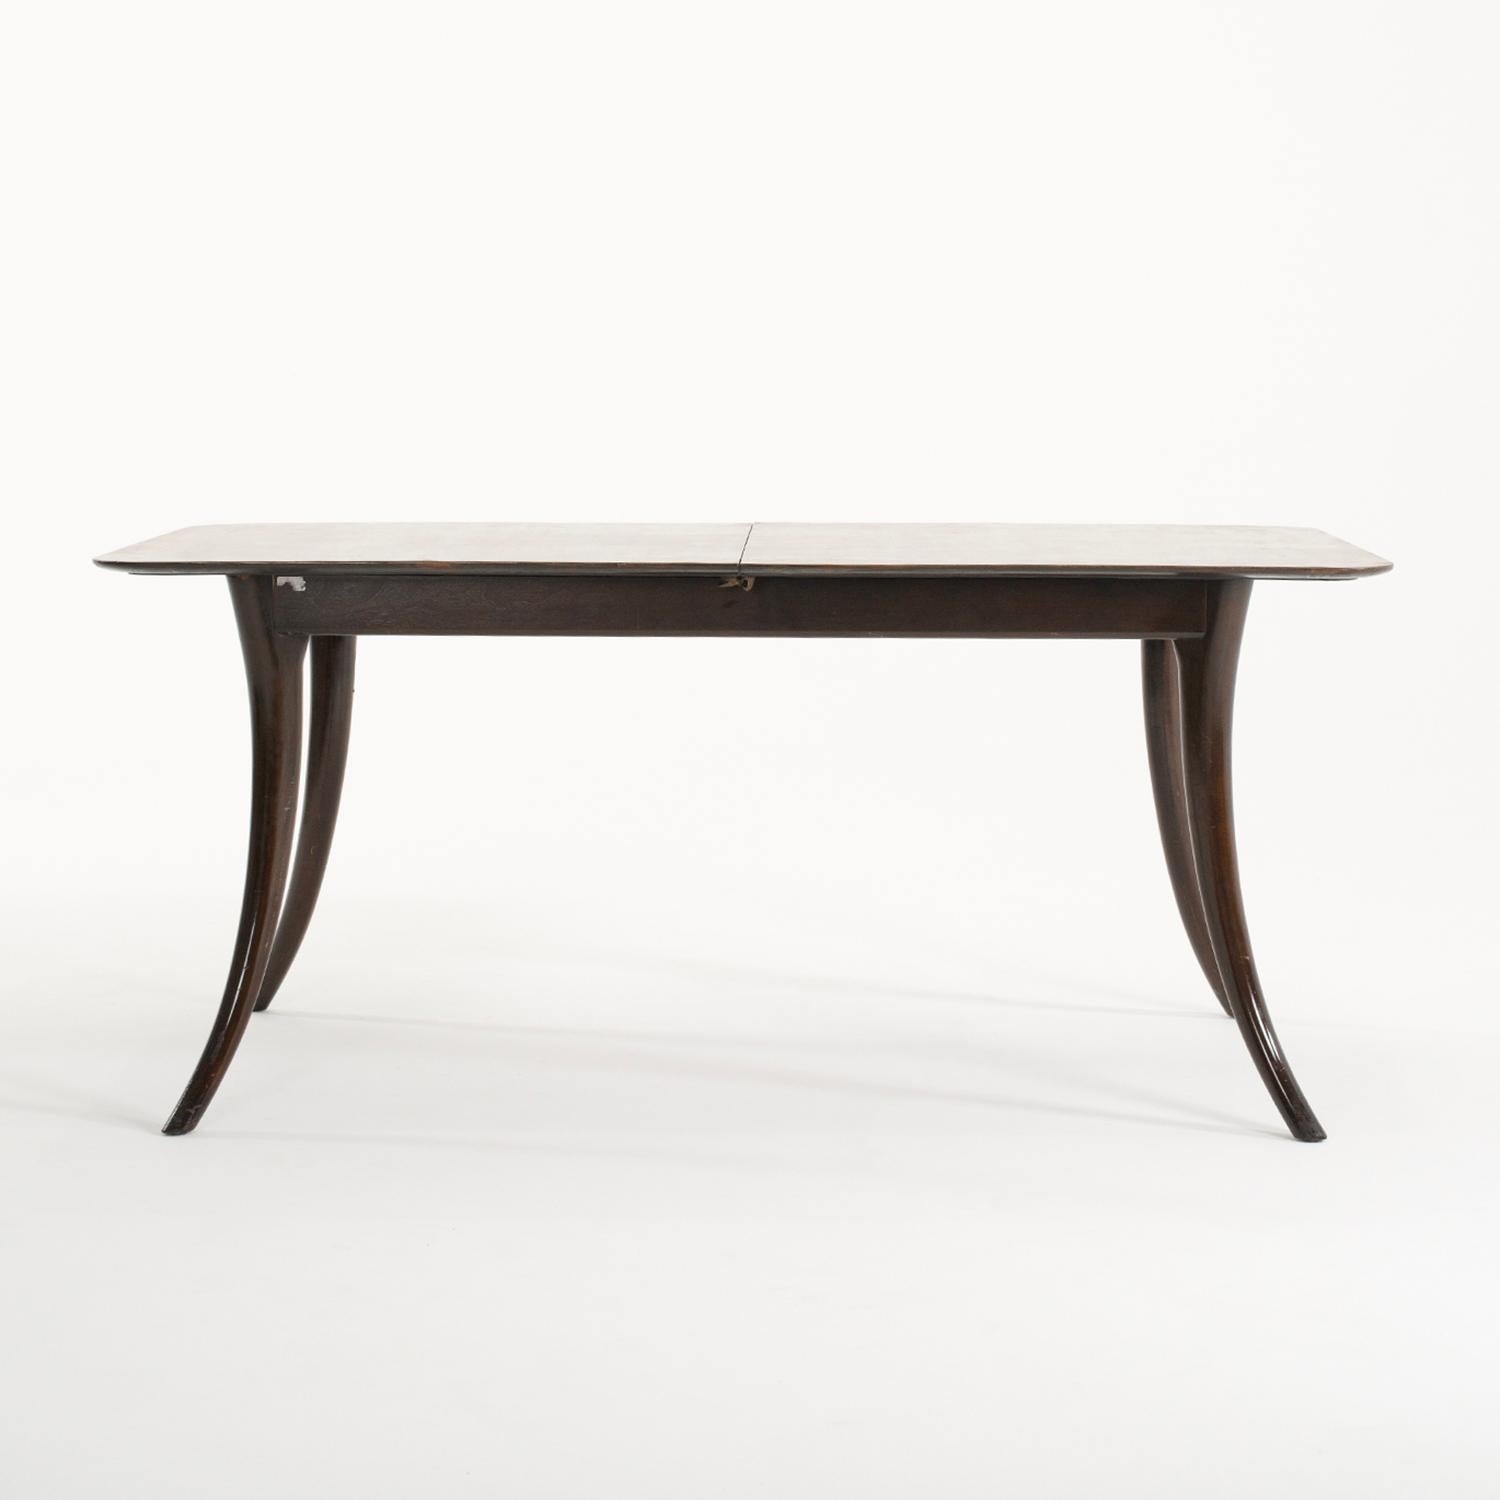 A vintage Mid-Century modern Italian dining room table made of hand crafted polished Walnut, in good condition. The rectangular conference table has a slim top, supported by a frame, standing on four long sculptural wooden legs. The table could also